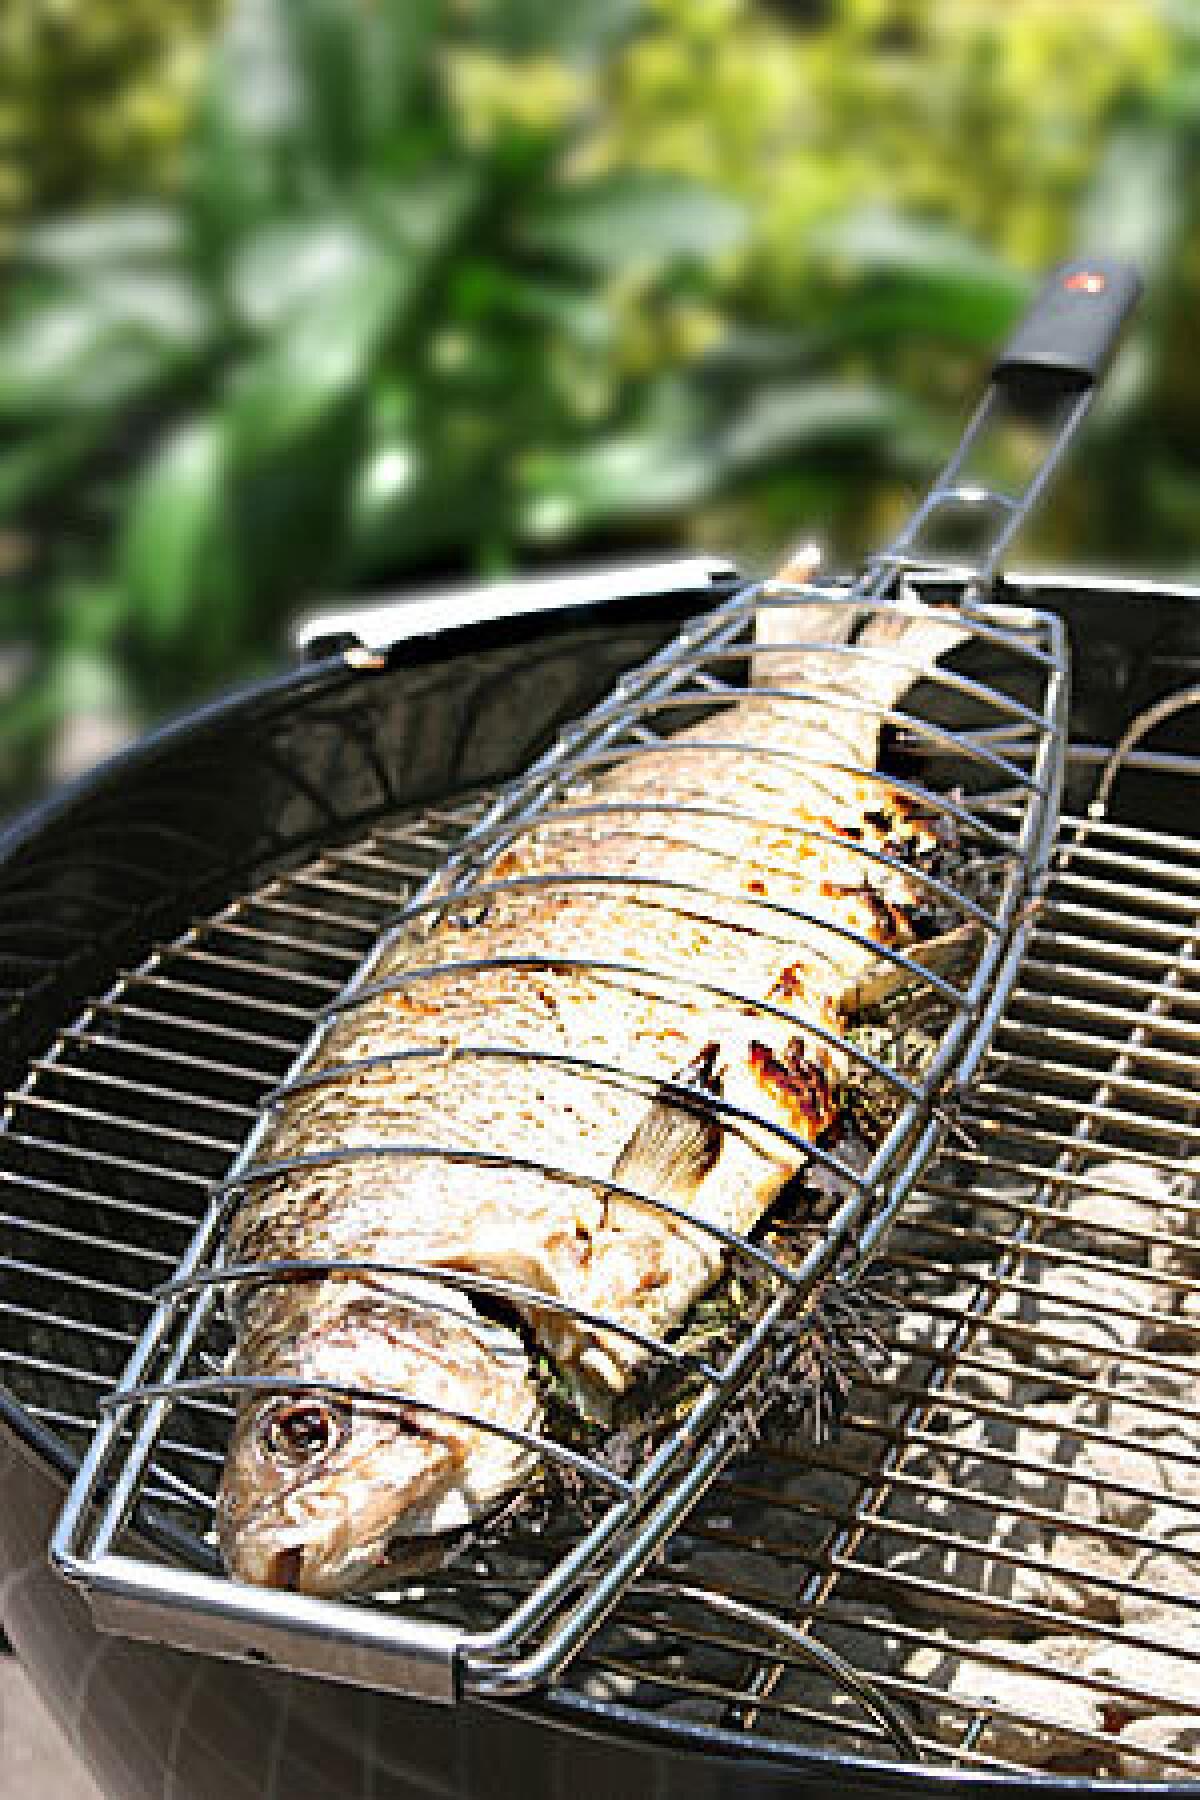 Grilled fish  light, flavorful and quickly cooked  is the perfect entree for alfresco meals. The right fish and the right fire are key.